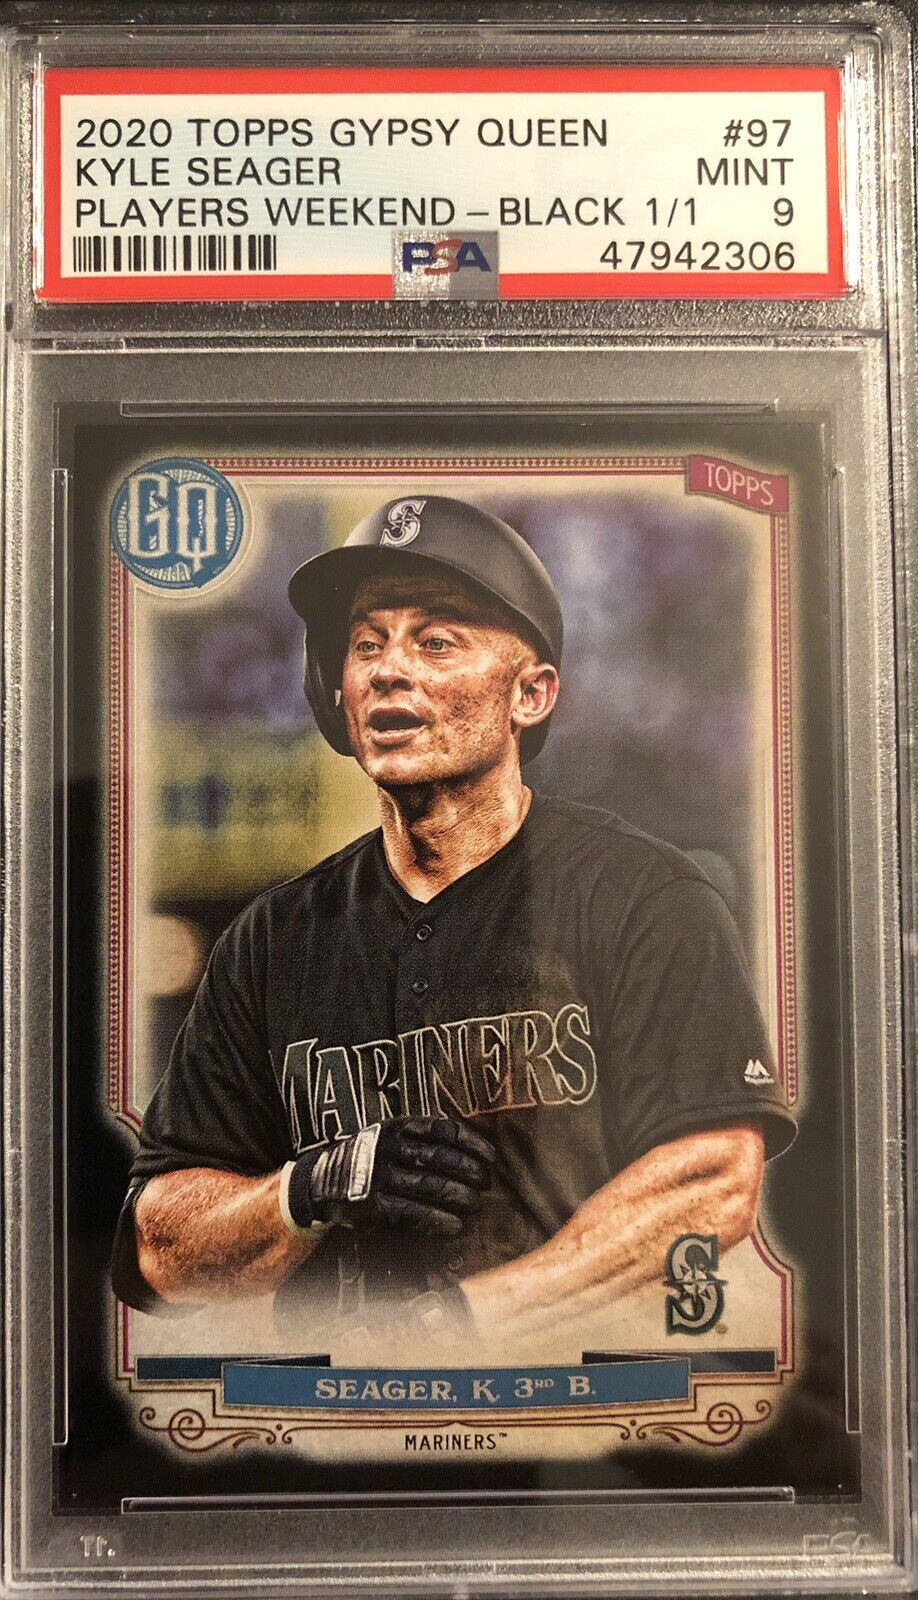 2020 Topps Gypsy Queen Kyle Seager Players Weekend Variation Black 1/1 PSA 9